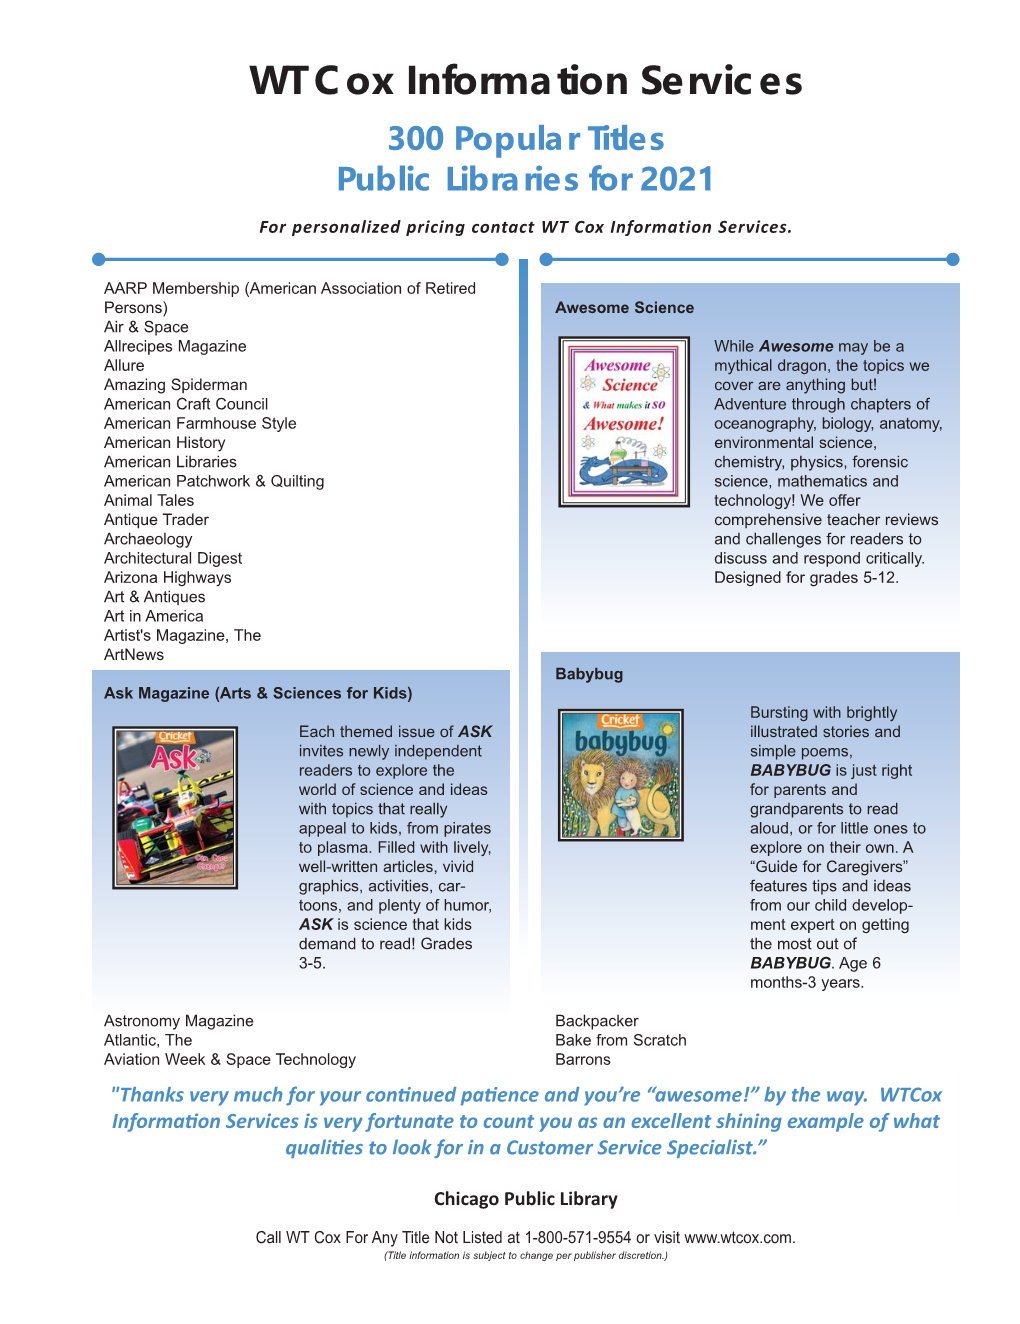 WT Cox Information Services 300 Popular Titles Public Libraries for 2021